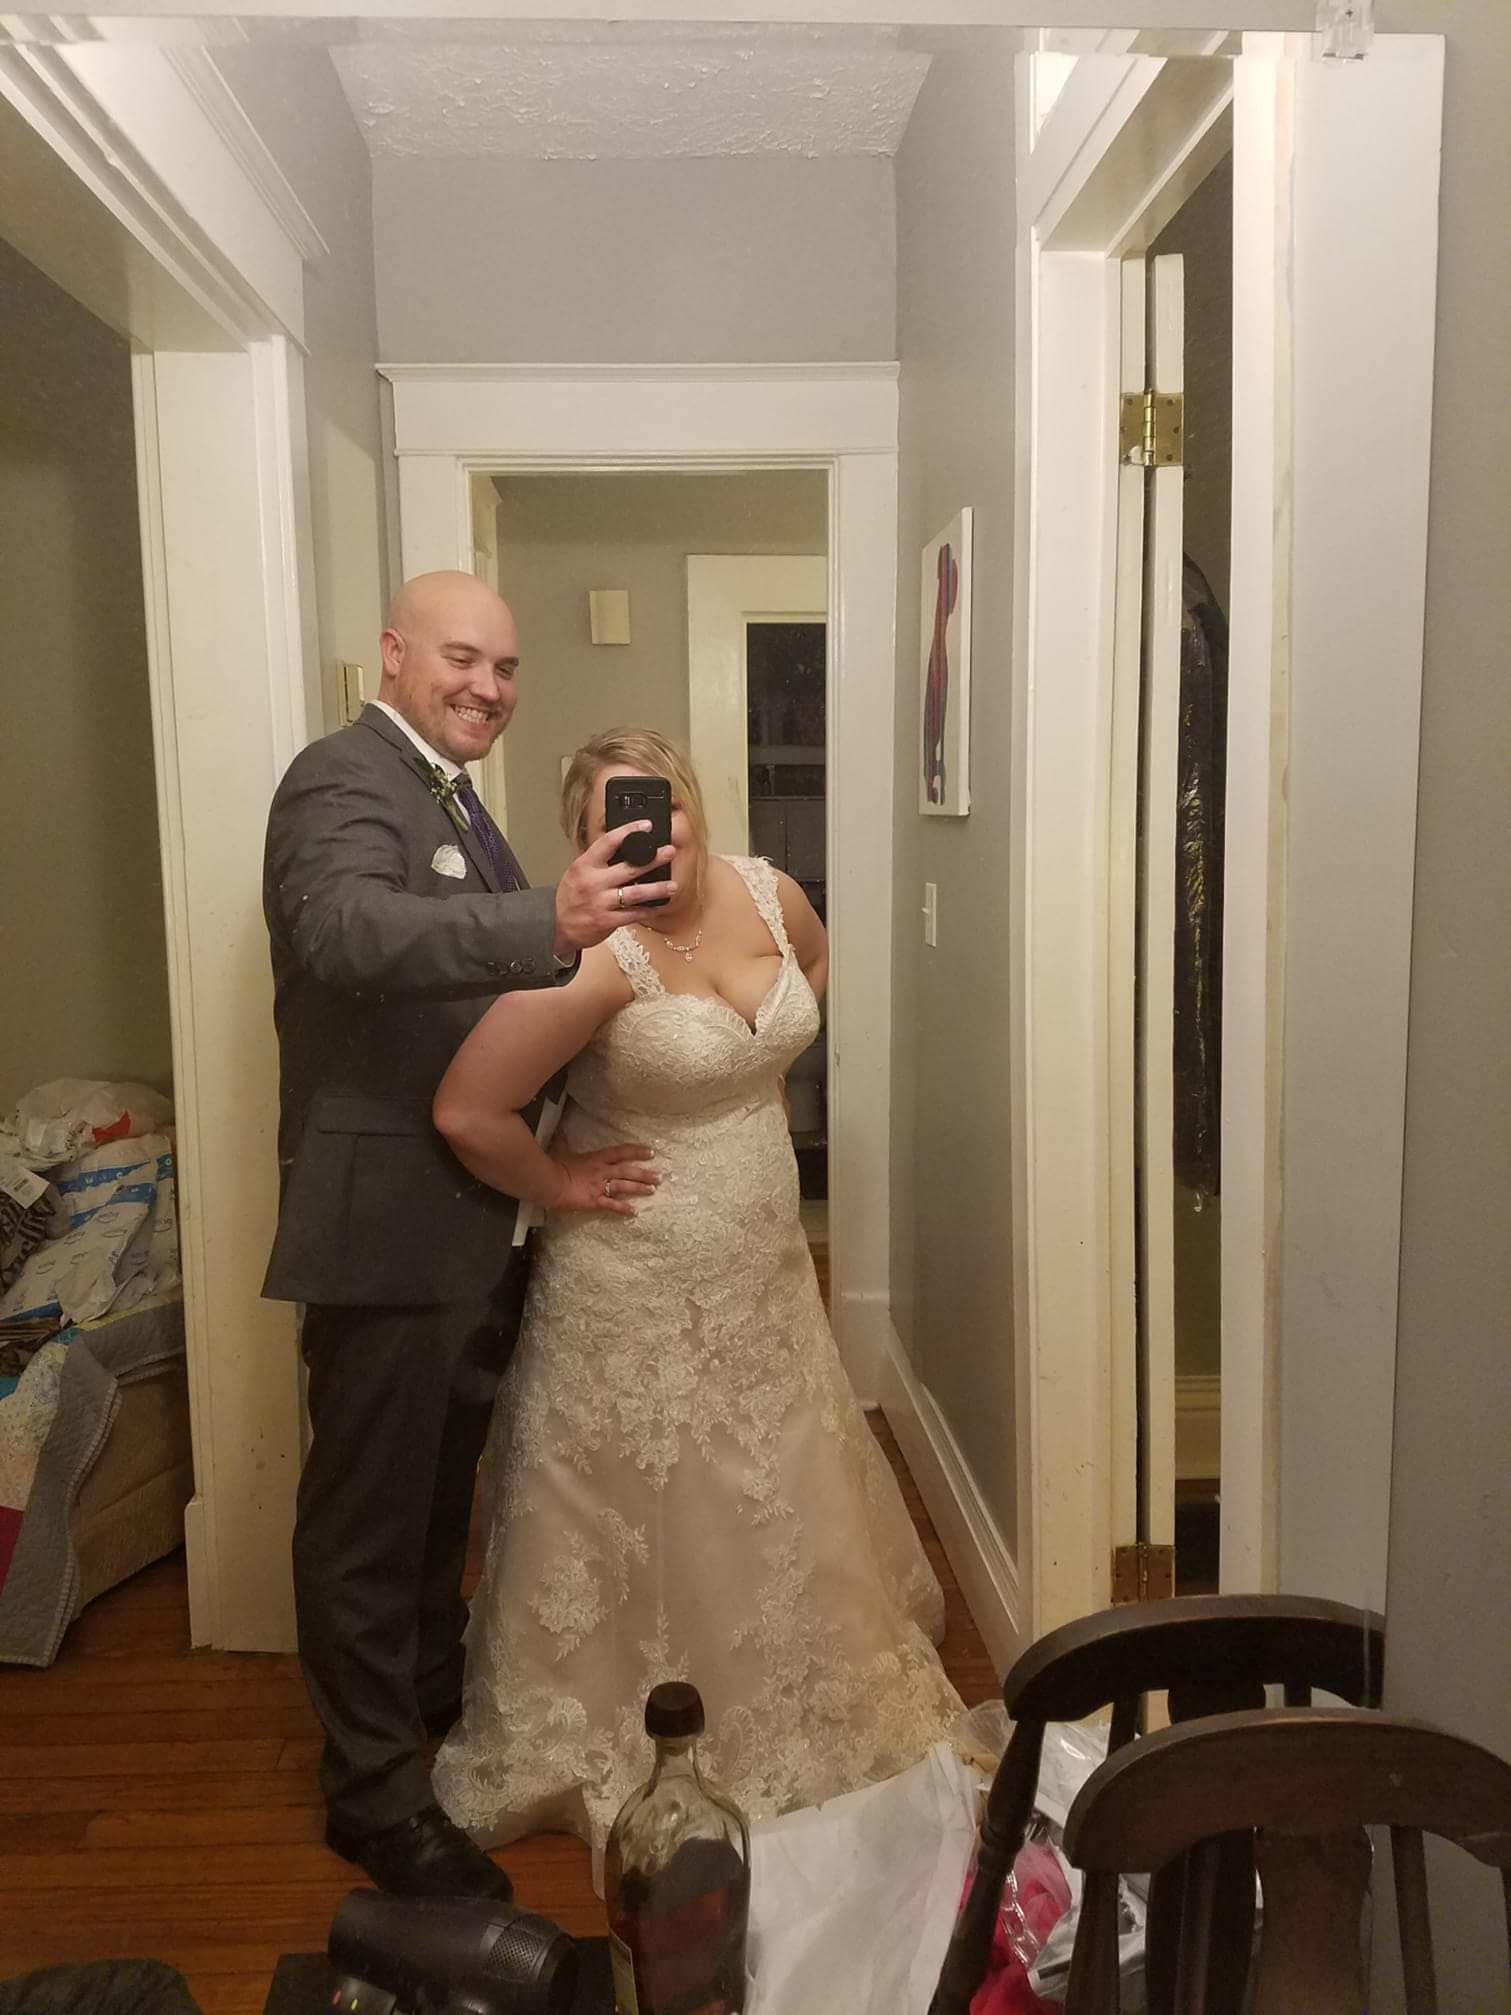 Asked my husband to take a picture of us on our wedding night. This was his only picture.